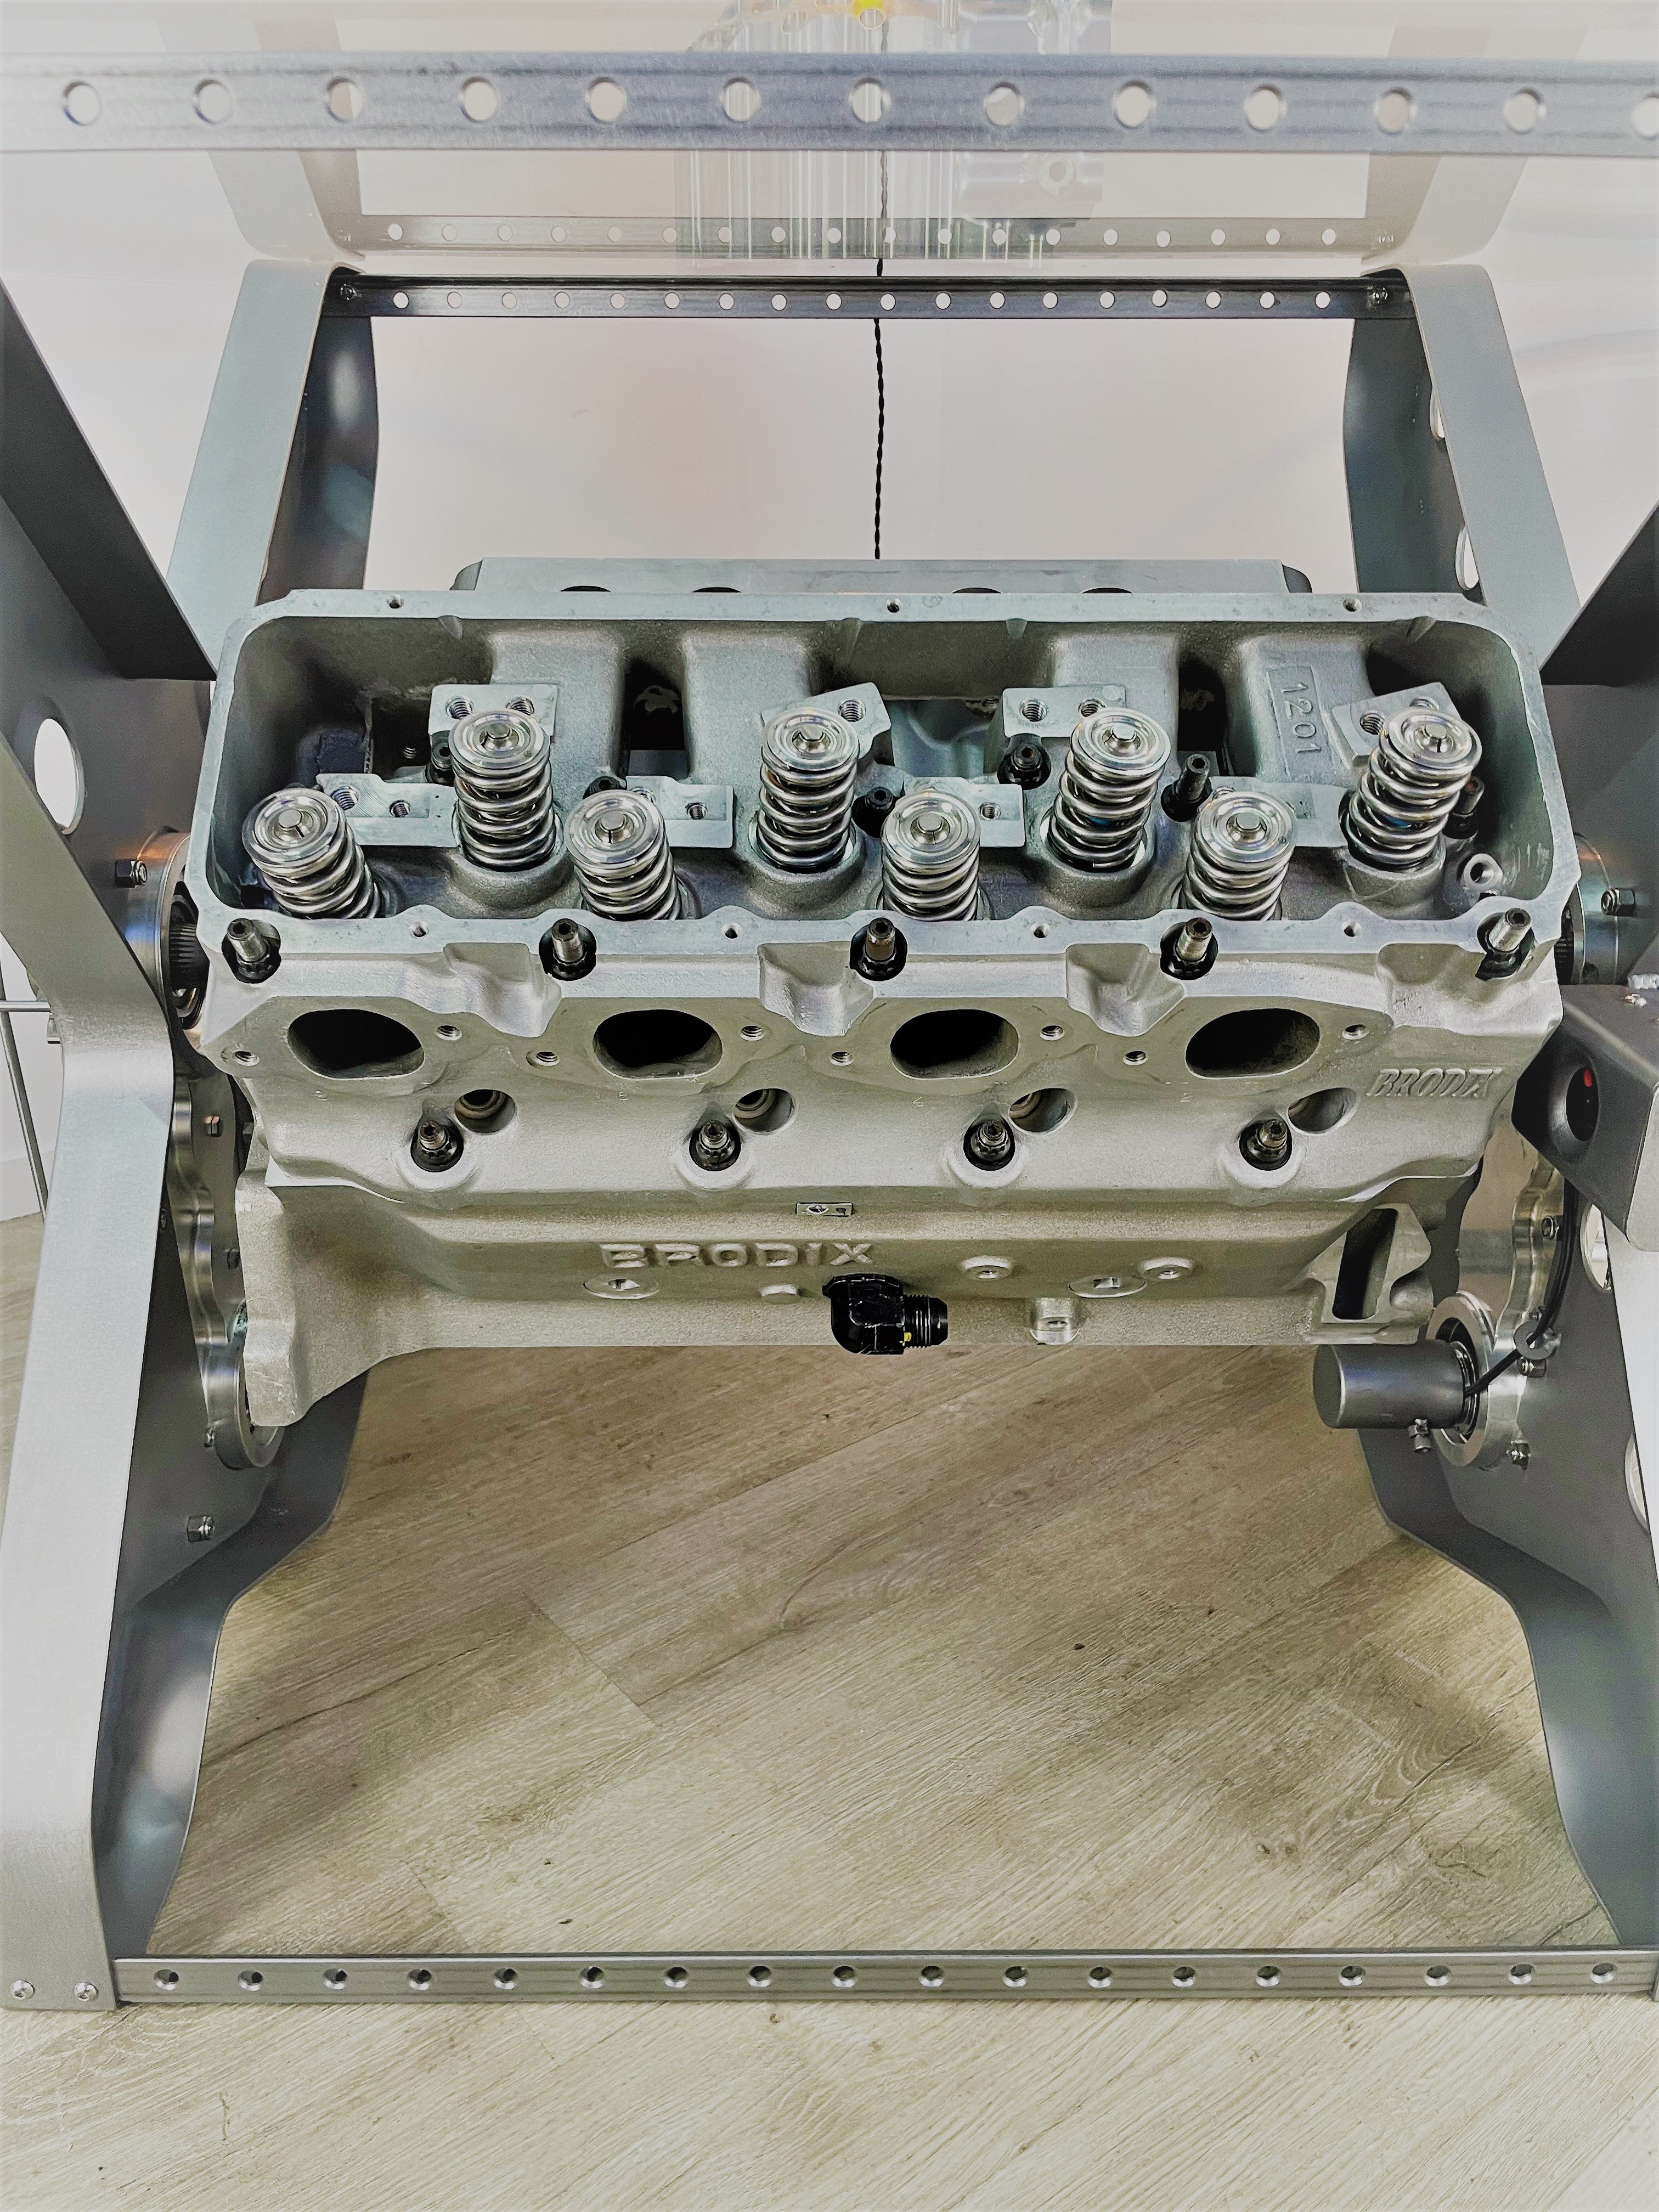 Close-up view of the rotating engine within an X-frame dining table.